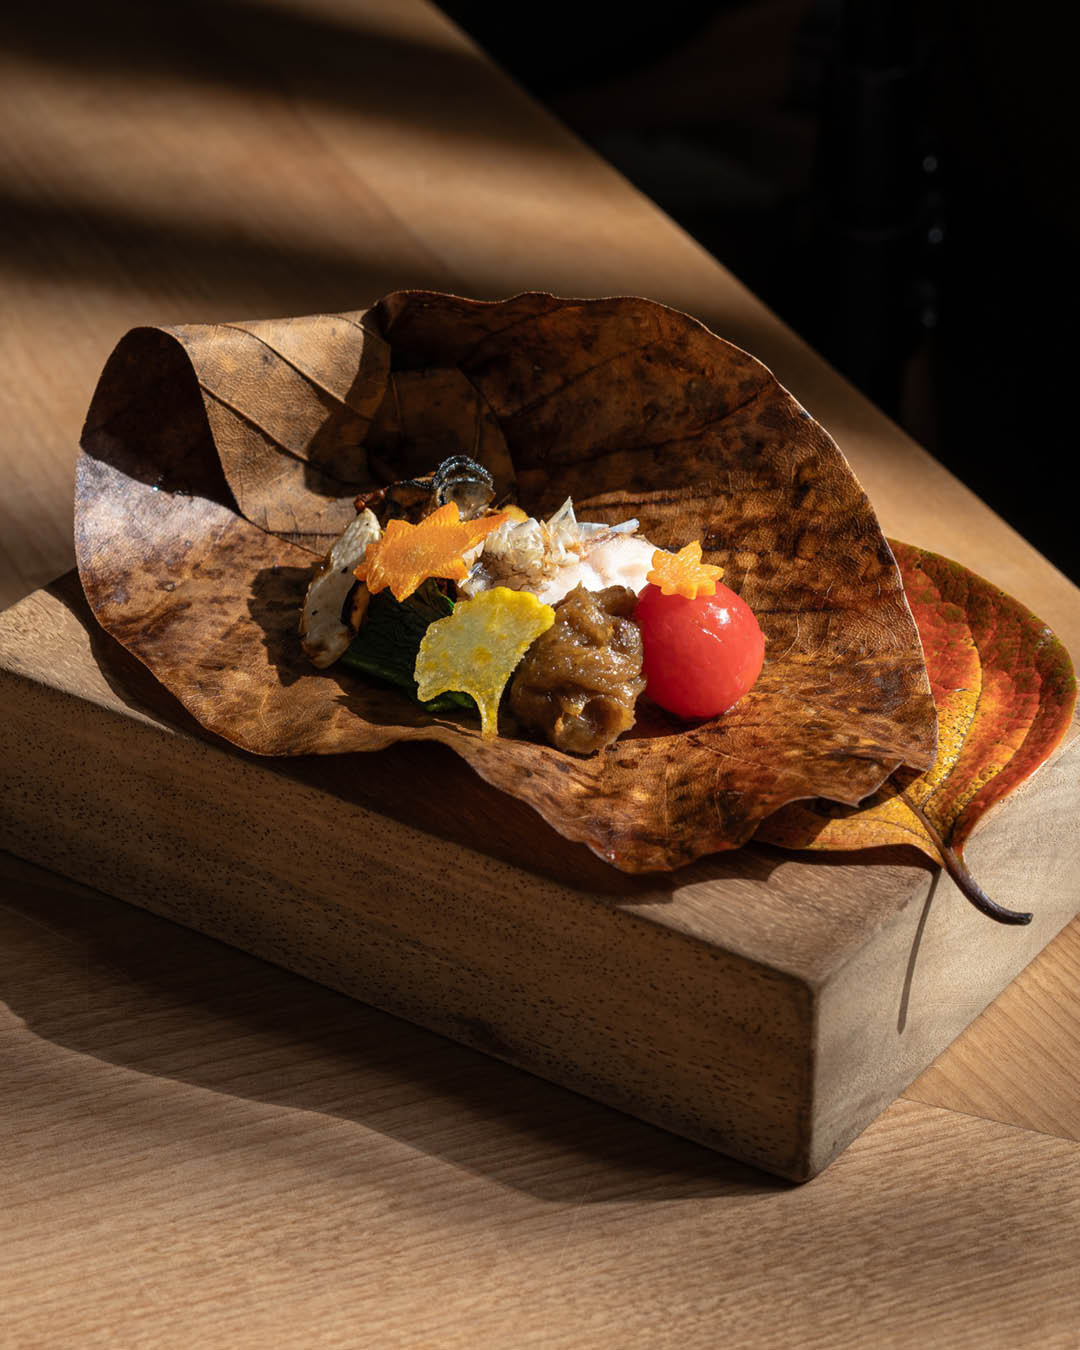 A starter served on a leaf on a wooden block at Hashida, Singapore.